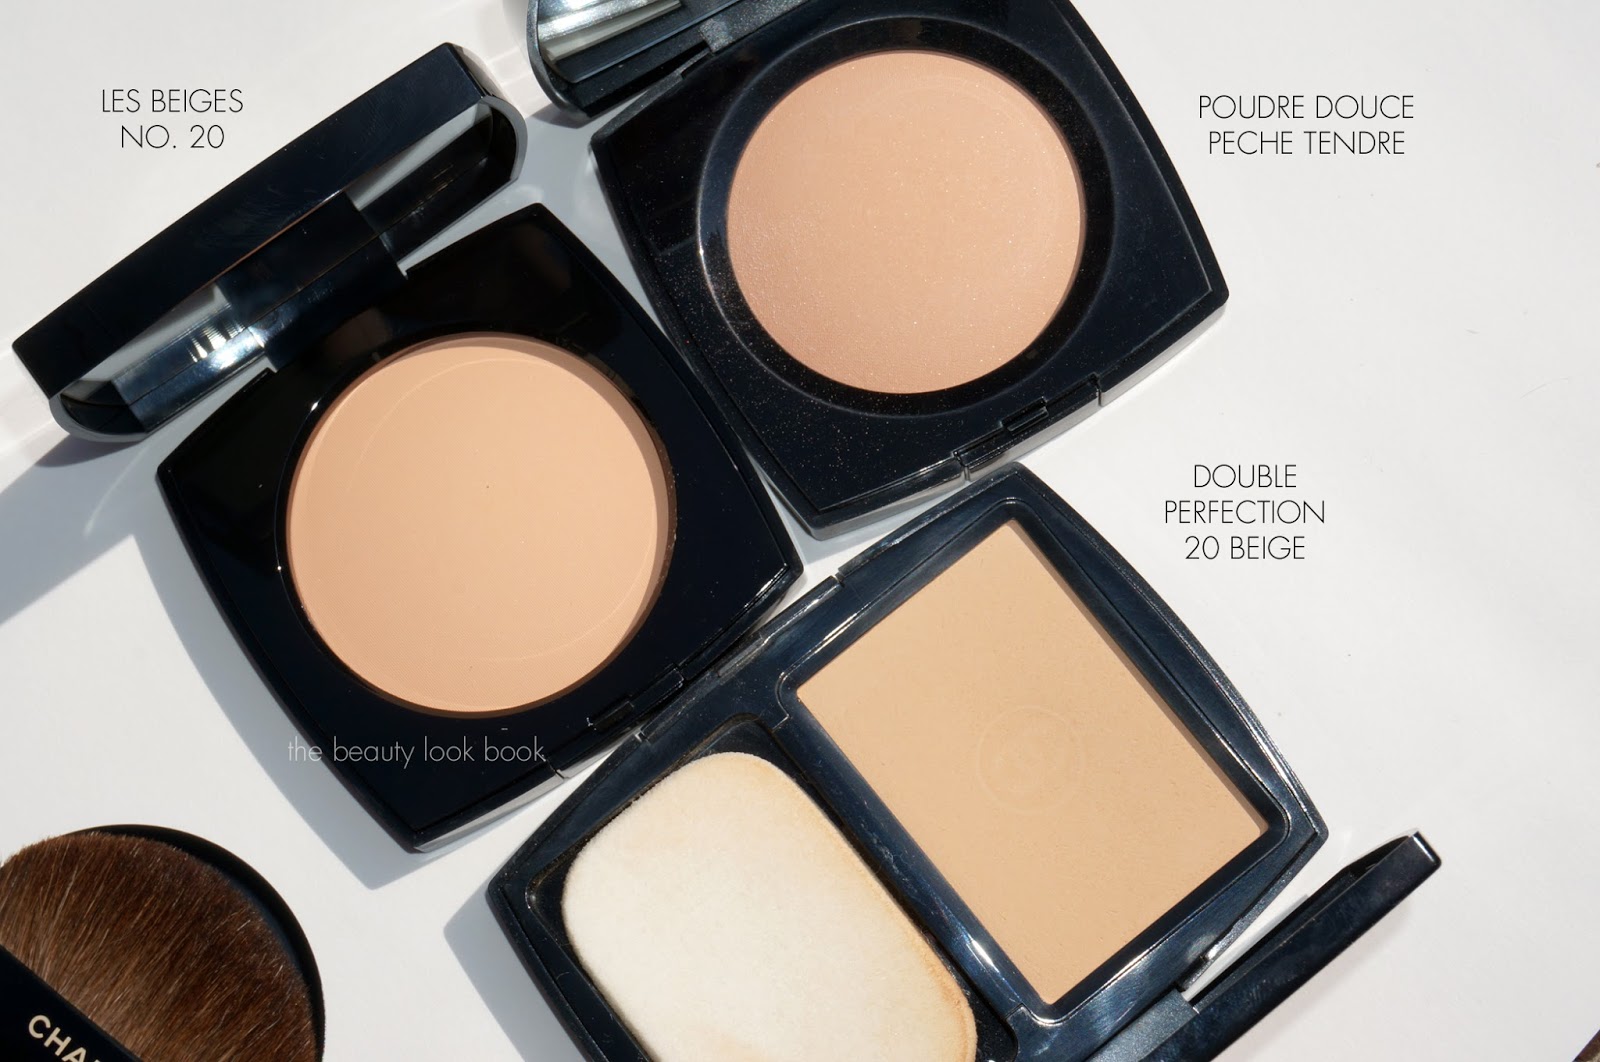 Chanel Les Beiges Comparisons - The Beauty Look Book